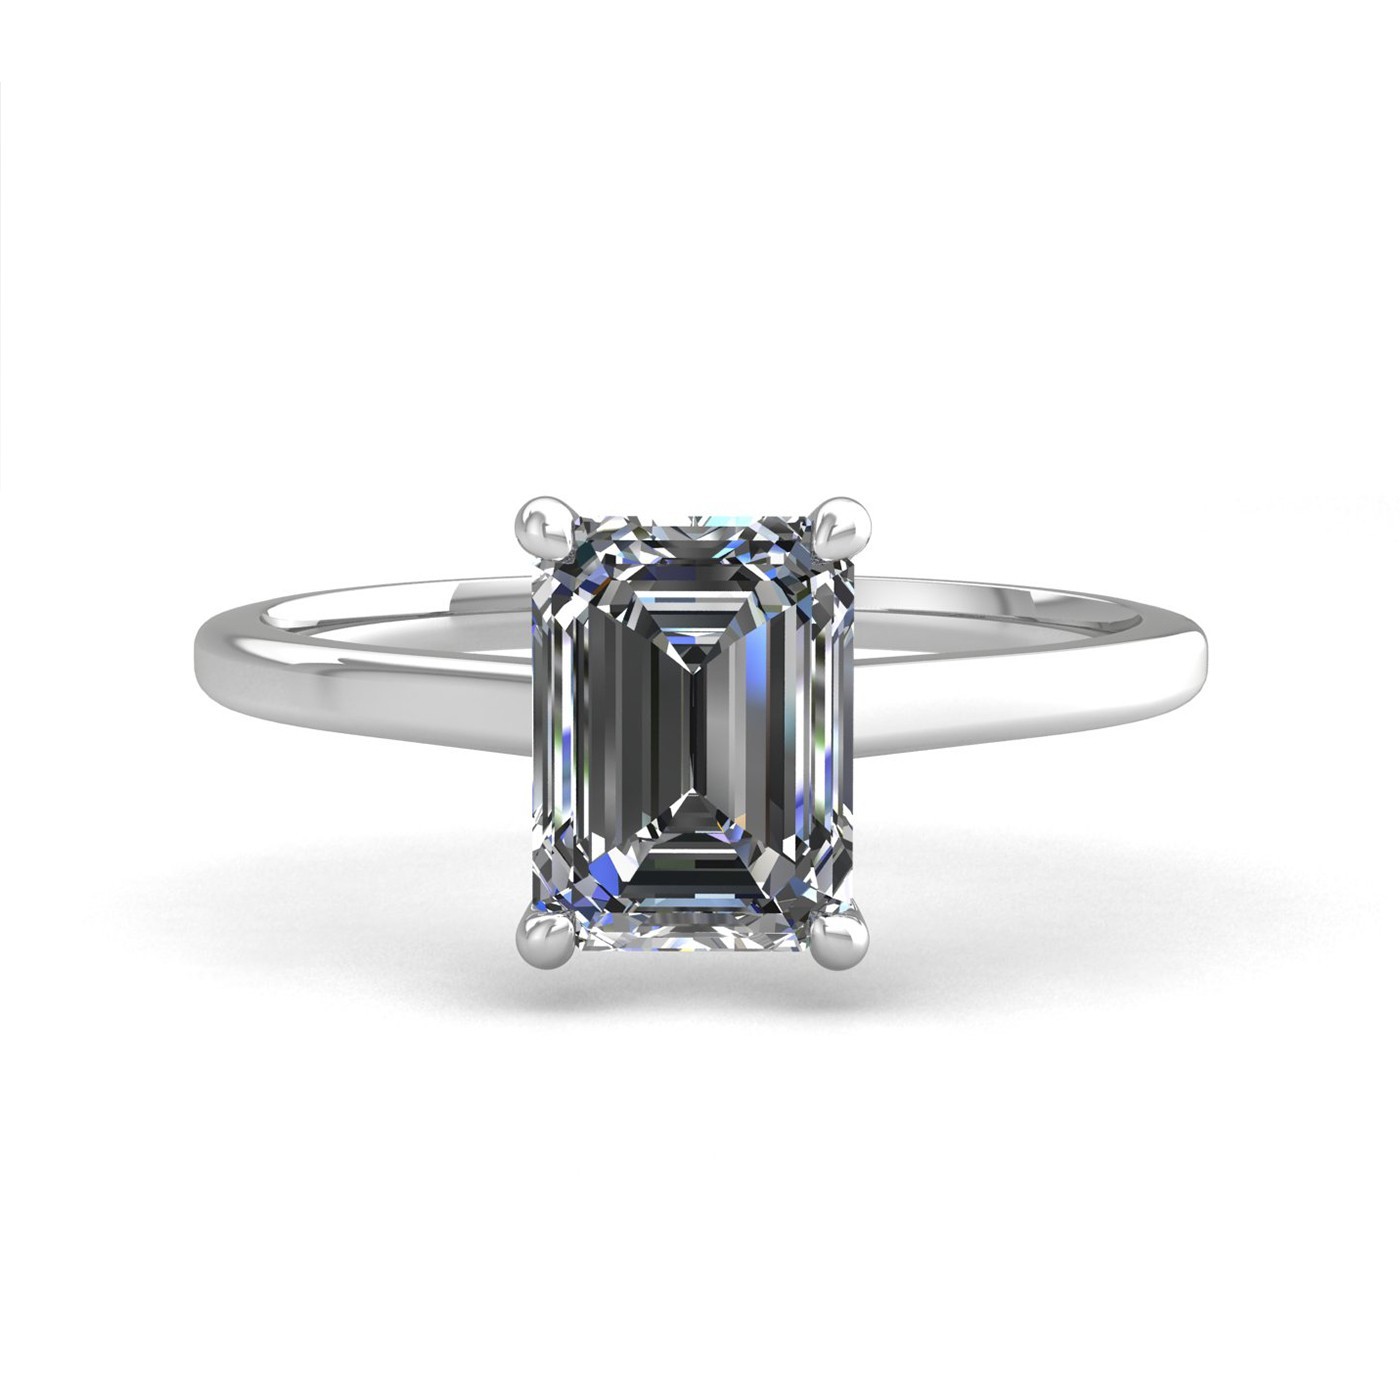 18k white gold  0,30 ct 4 prongs solitaire emerald cut diamond engagement ring with whisper thin band Photos & images